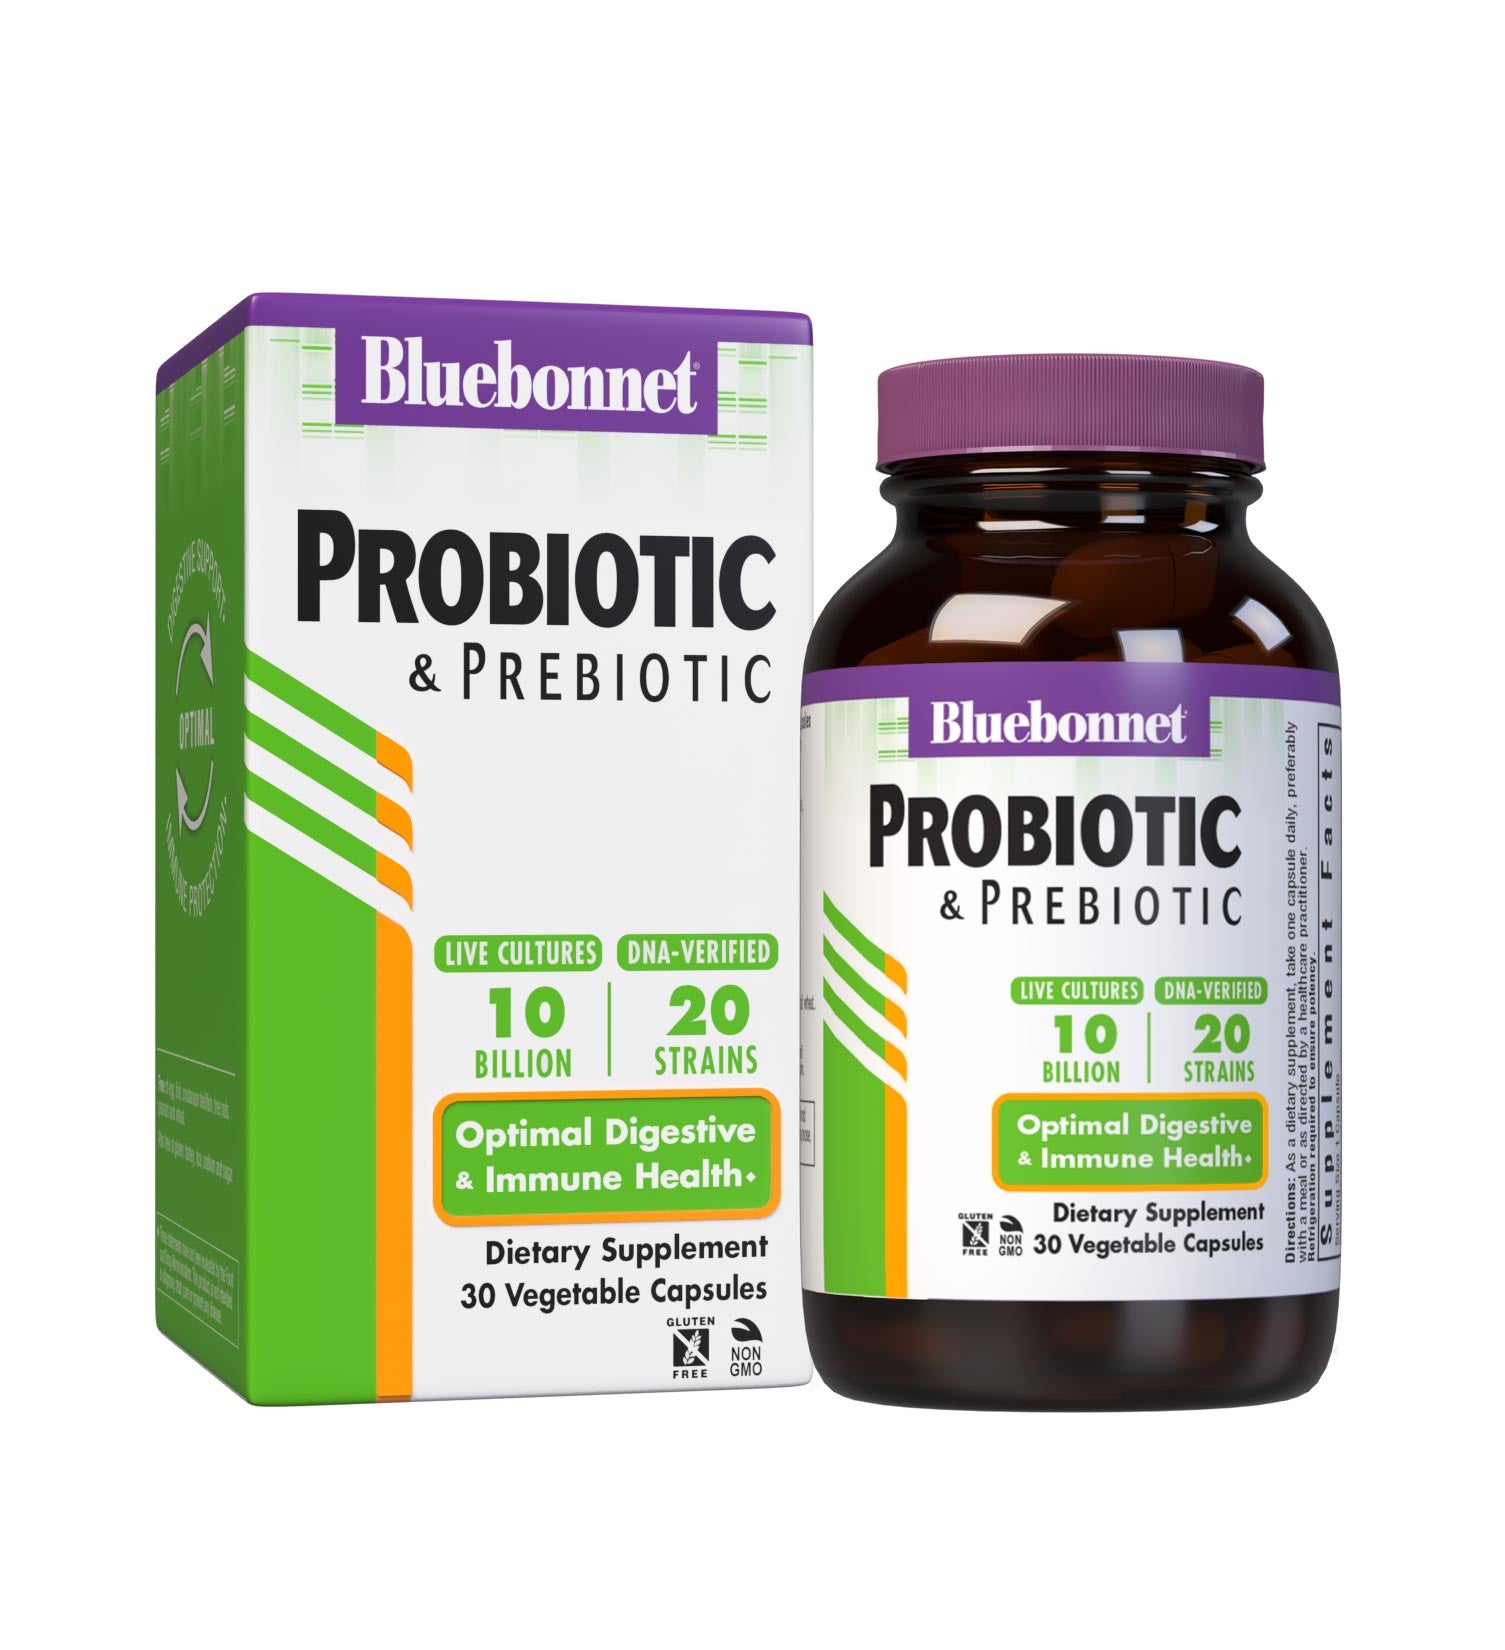 Bluebonnet’s Probiotic & Prebiotic 30 Vegetable Capsules are formulated with 10 billion viable cultures from 20 DNA-verified, scientifically supported strains. This unique, science-based probiotic formula includes the prebiotic inulin from chicory root extract, to assist the growth of friendly bacterium in the gut. with Box. #size_30 count